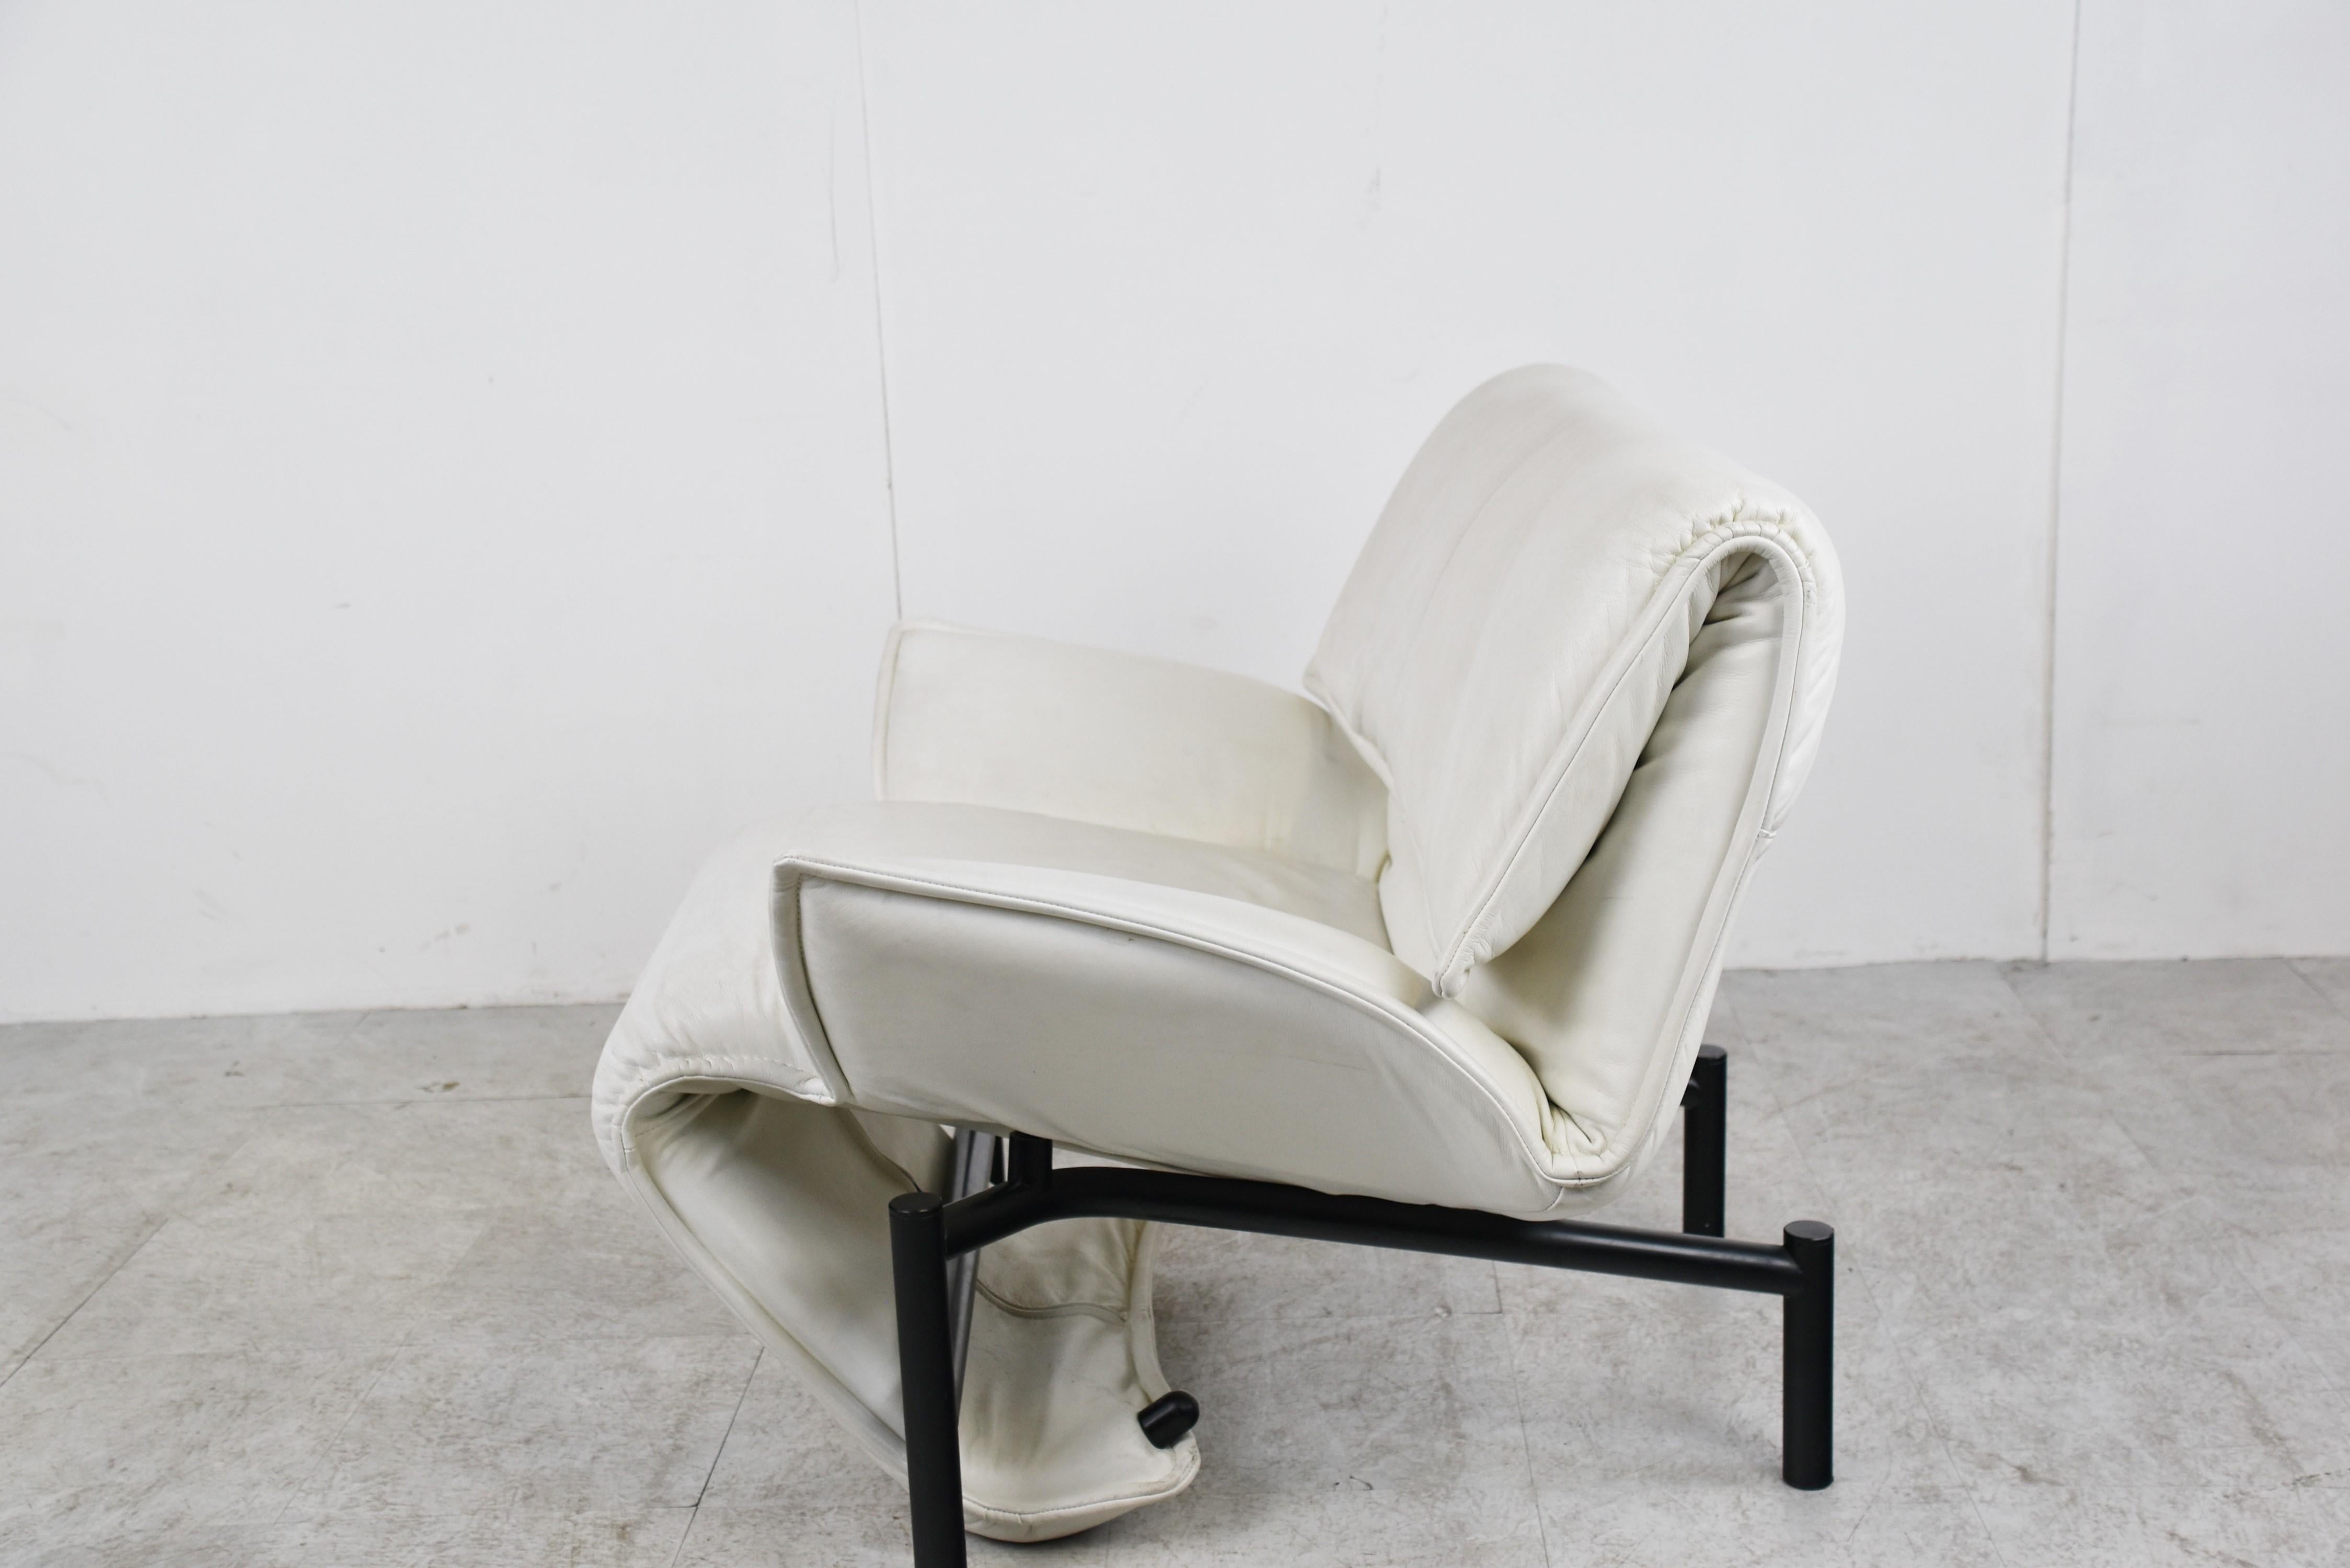 Vintage Leather Veranda Lounge Chair by Vico Magistretti for Cassina, 1980s For Sale 1